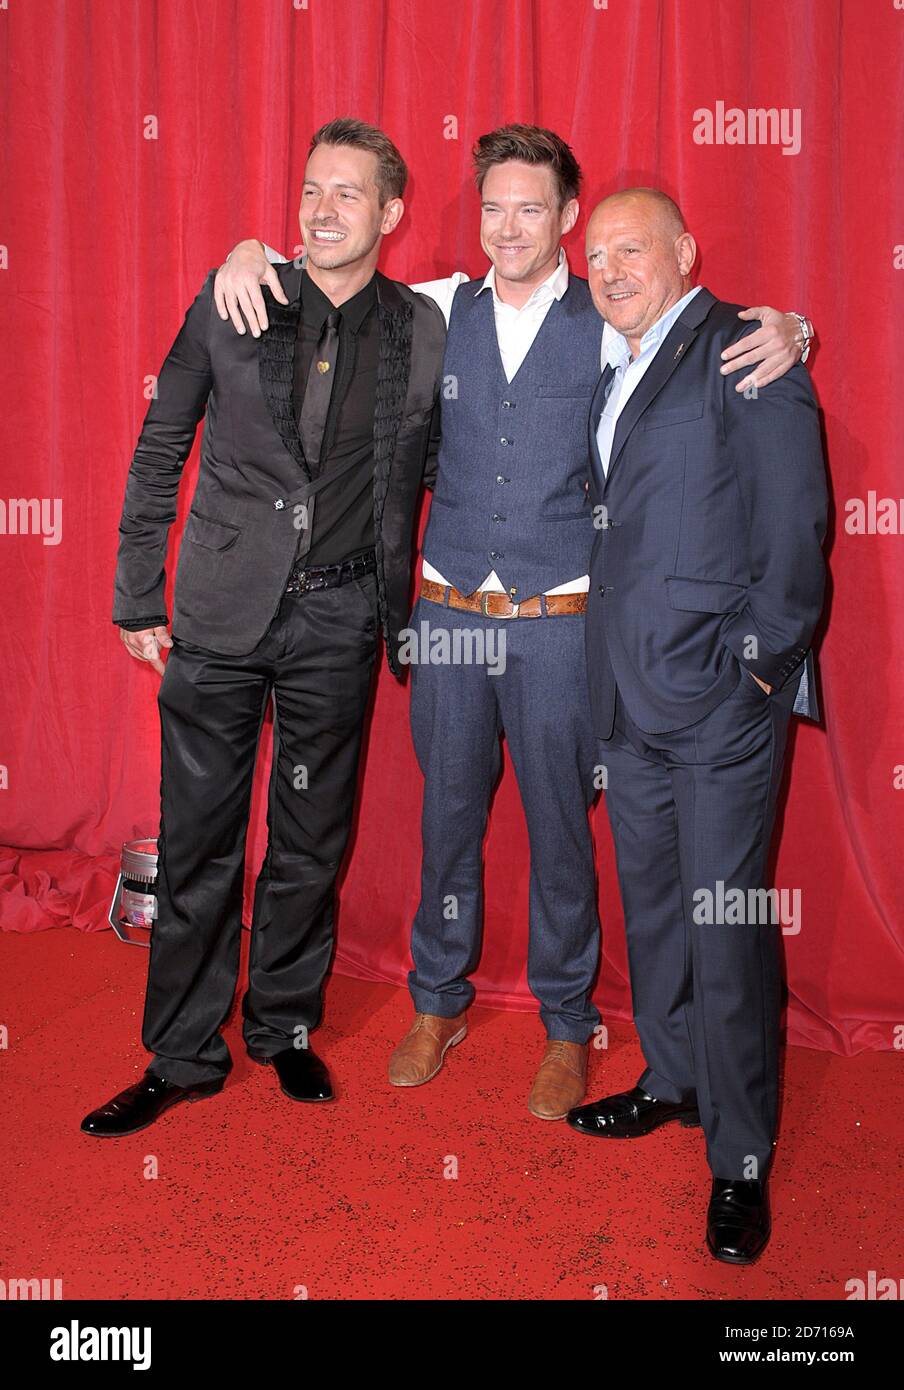 (left to right) Ashley Taylor Dawson, Andrew Moss and David Kennedy arriving for the 2014 British Soap Awards at The Hackney Empire, 291 Mare St, London. Stock Photo